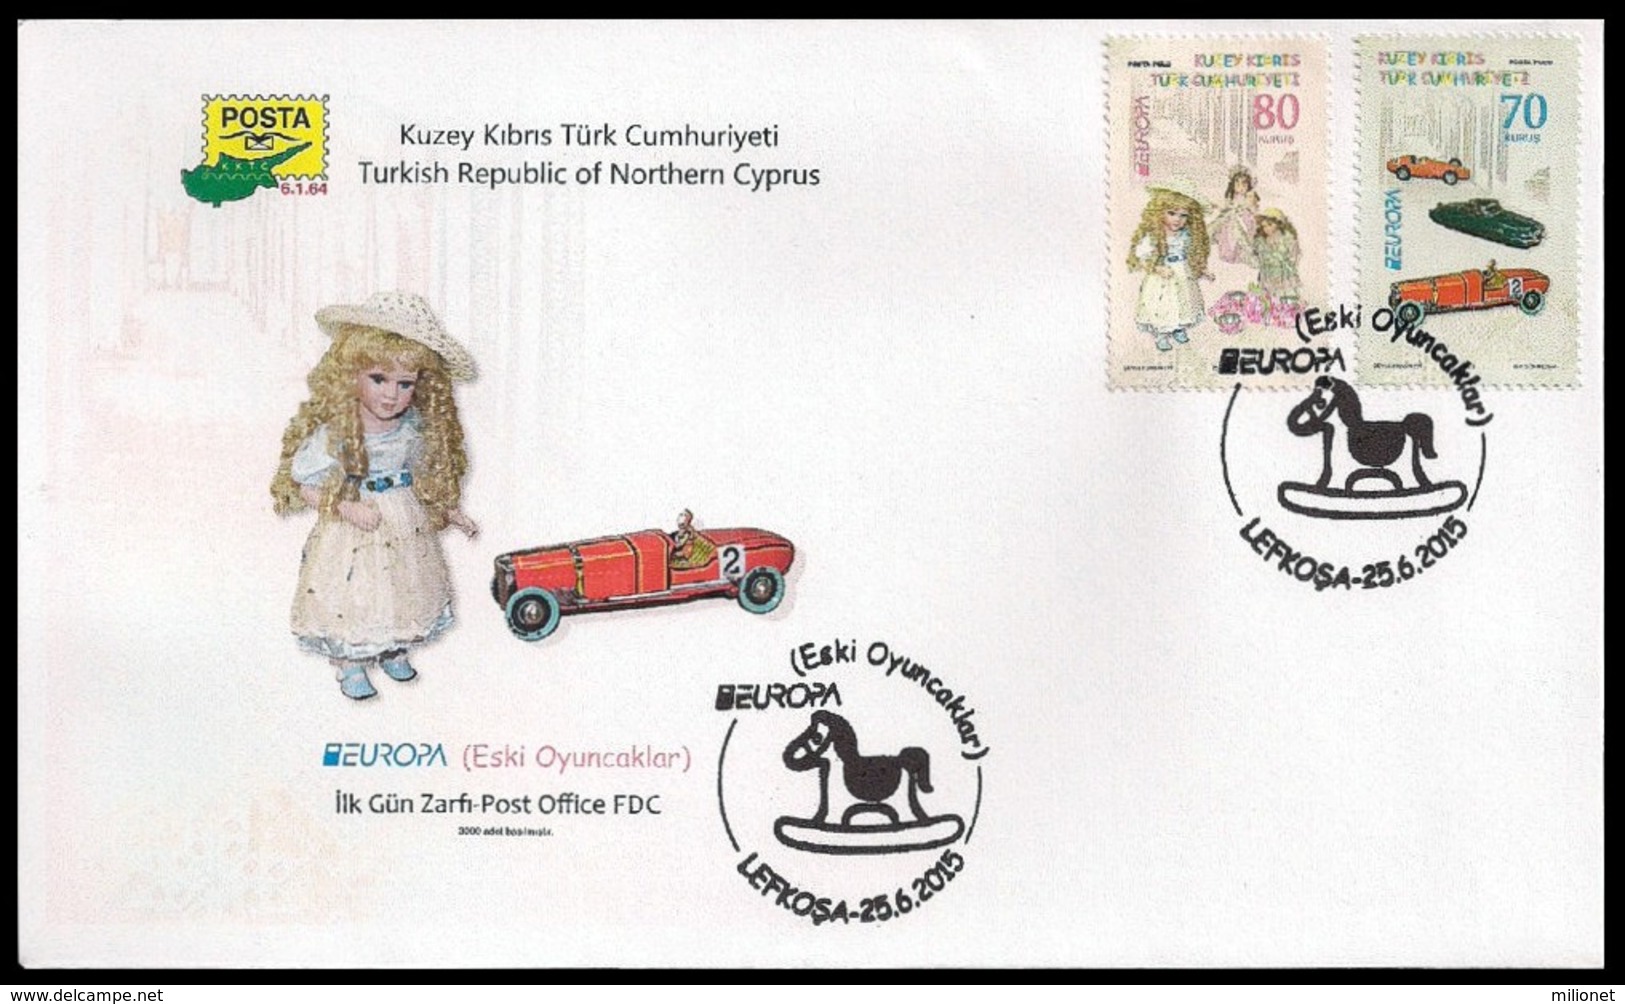 SALE!!! CHIPRE TURCO NORTHERN CYPRUS 2015 EUROPA CEPT OLD TOYS - FDC First Day Cover Of 2 Stamps - 2015